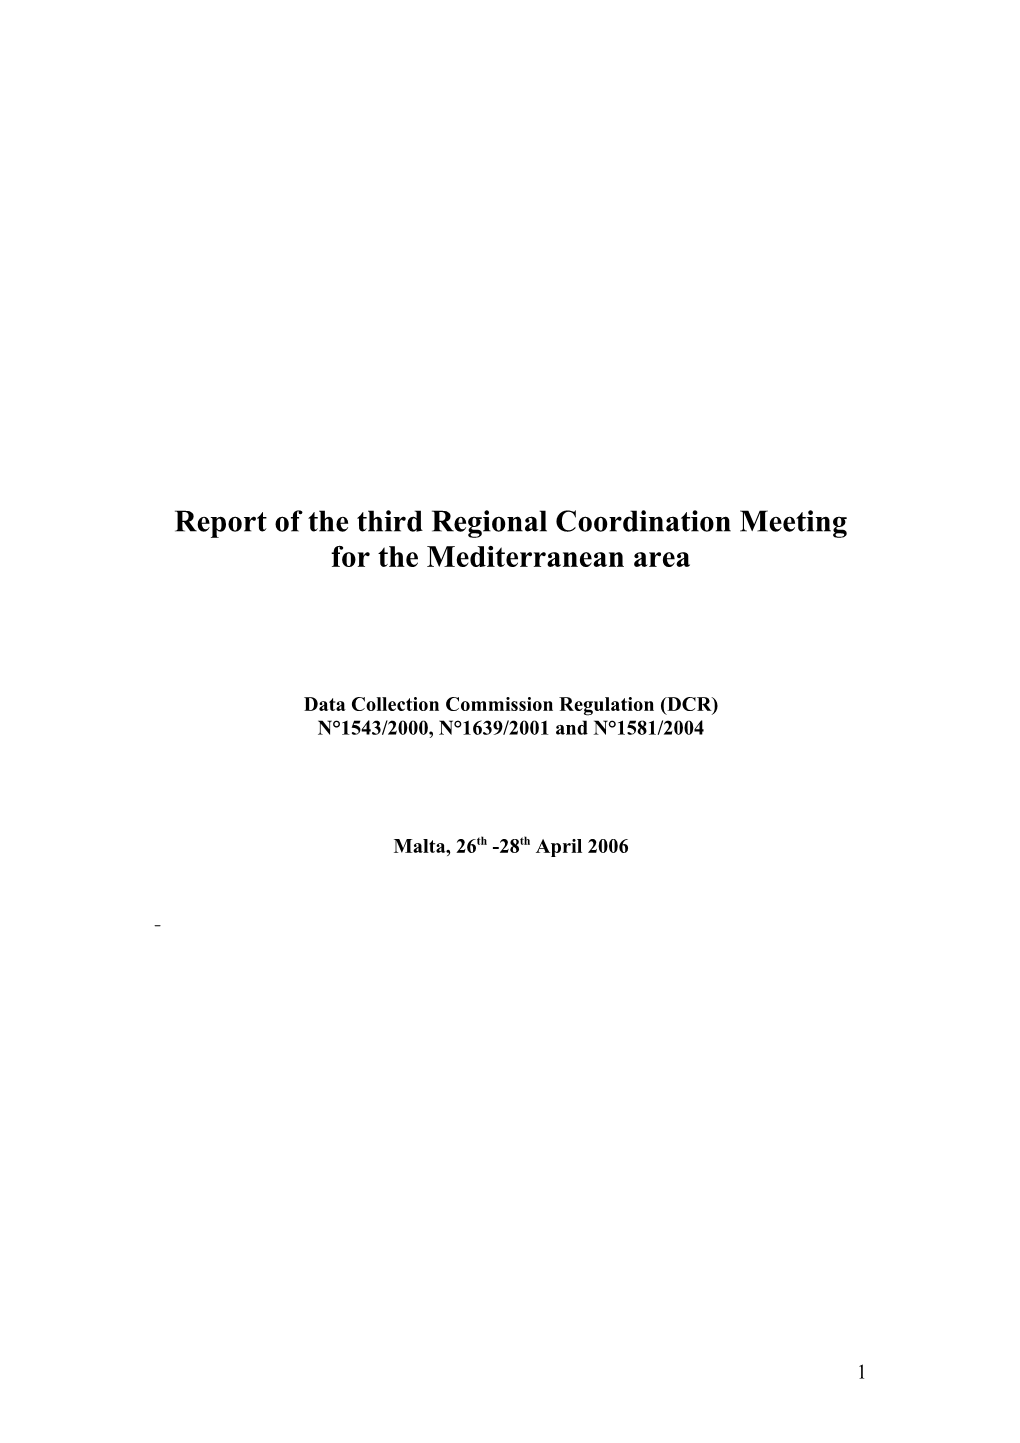 Report of the Third Regional Coordination Meeting for the Mediterranean Area